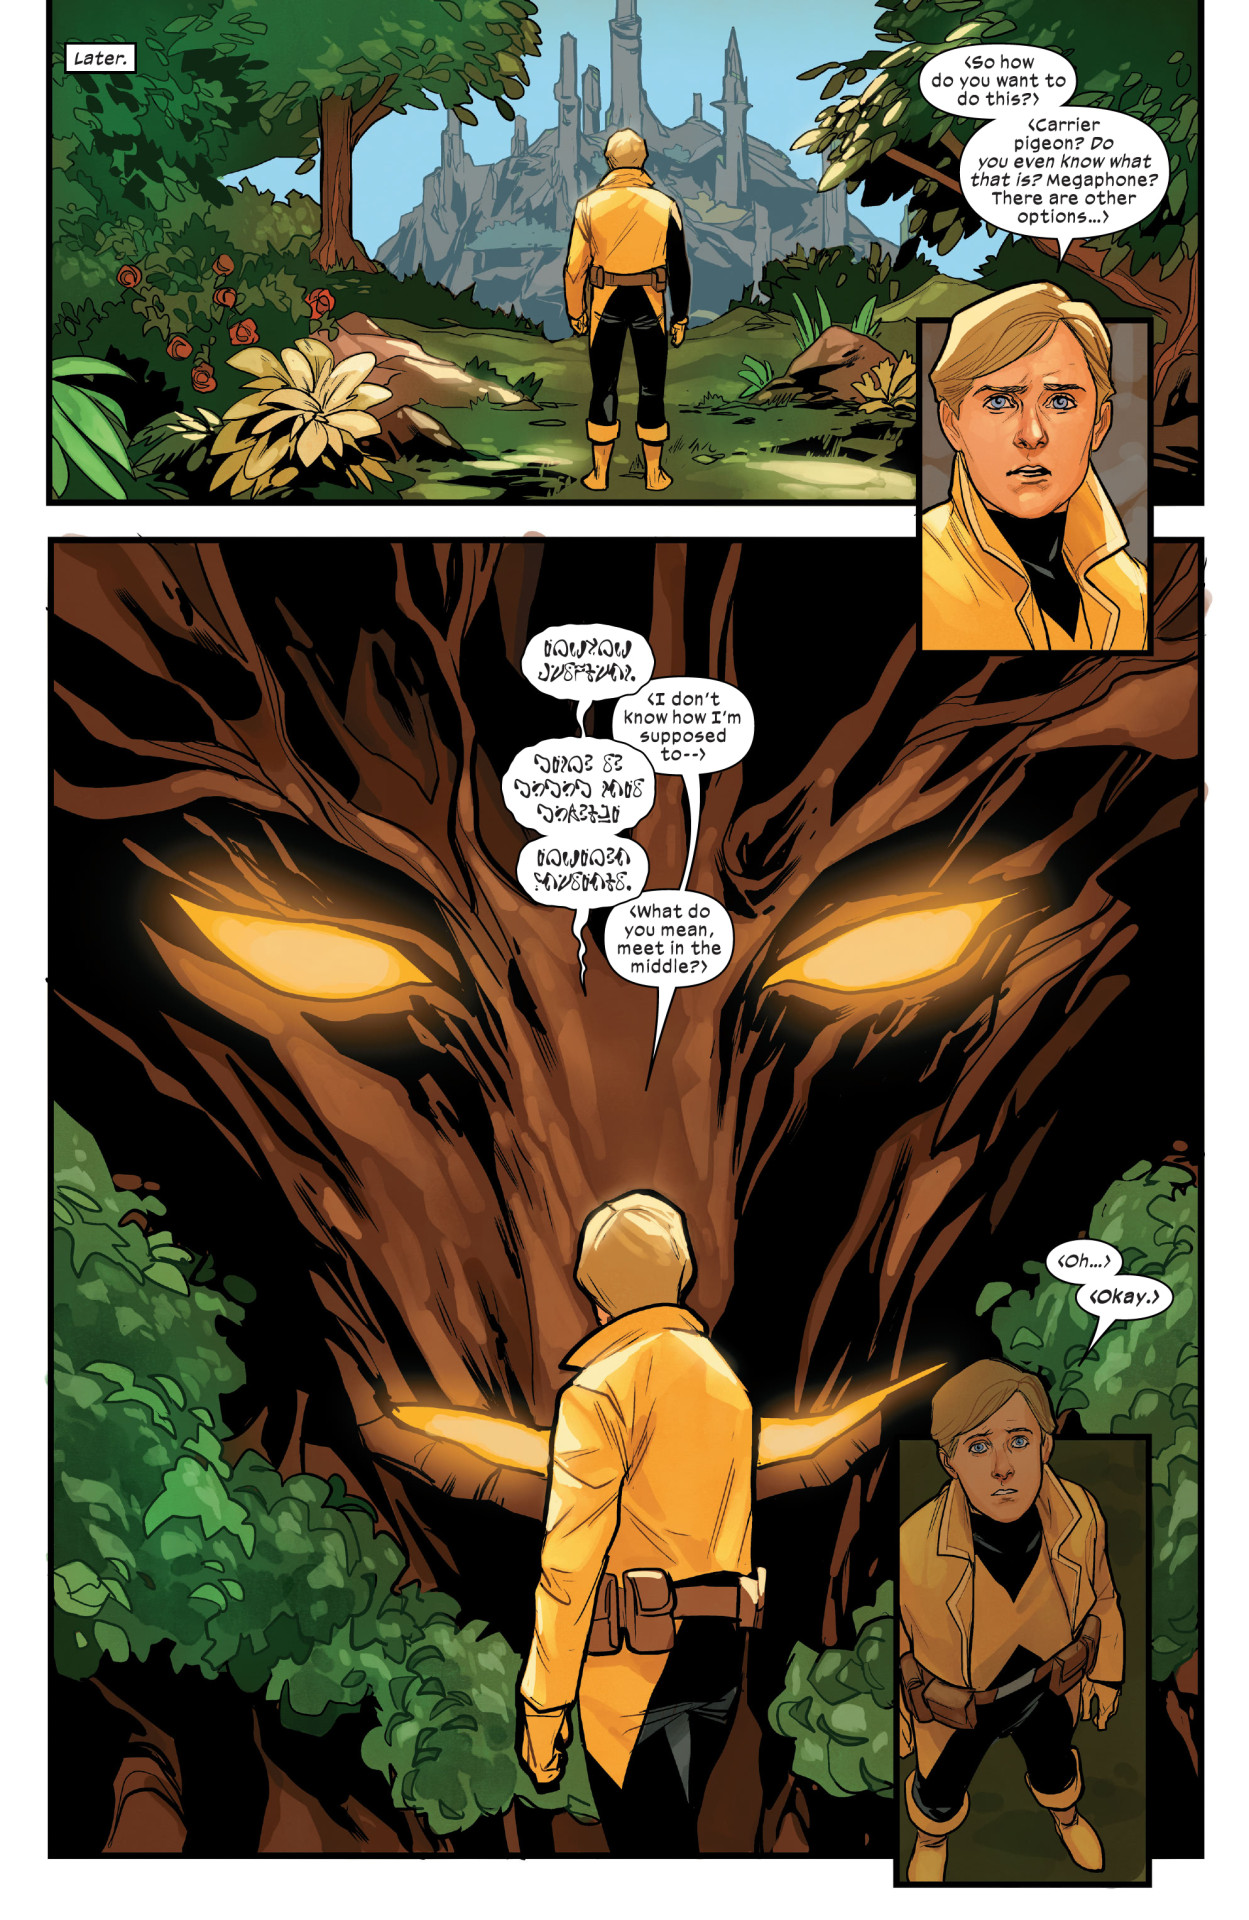 Cypher chats with Krakoa in X-Men Vol. 5 #16 "Sworded Out (2020), Marvel Comics. Words by Jonathan Hickman, art by Phil Noto and Clayton Cowles.